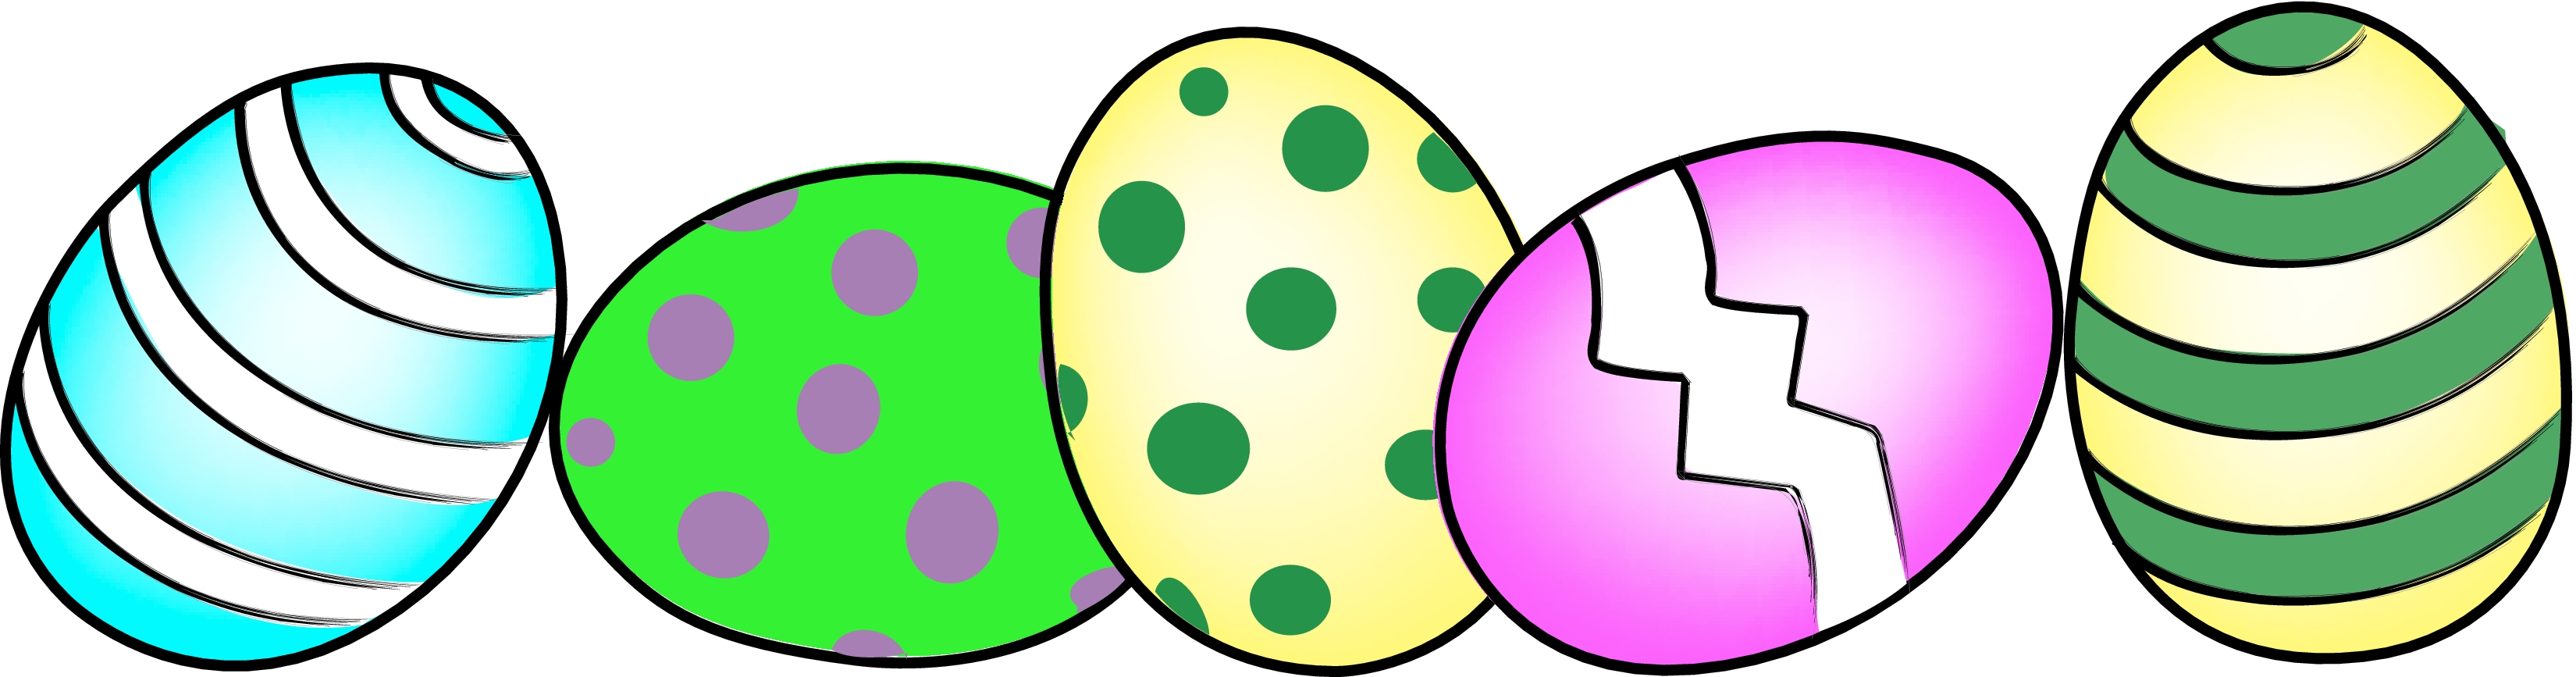 Easter Egg Clip Art Coloring Page | Clipart library - Free Clipart